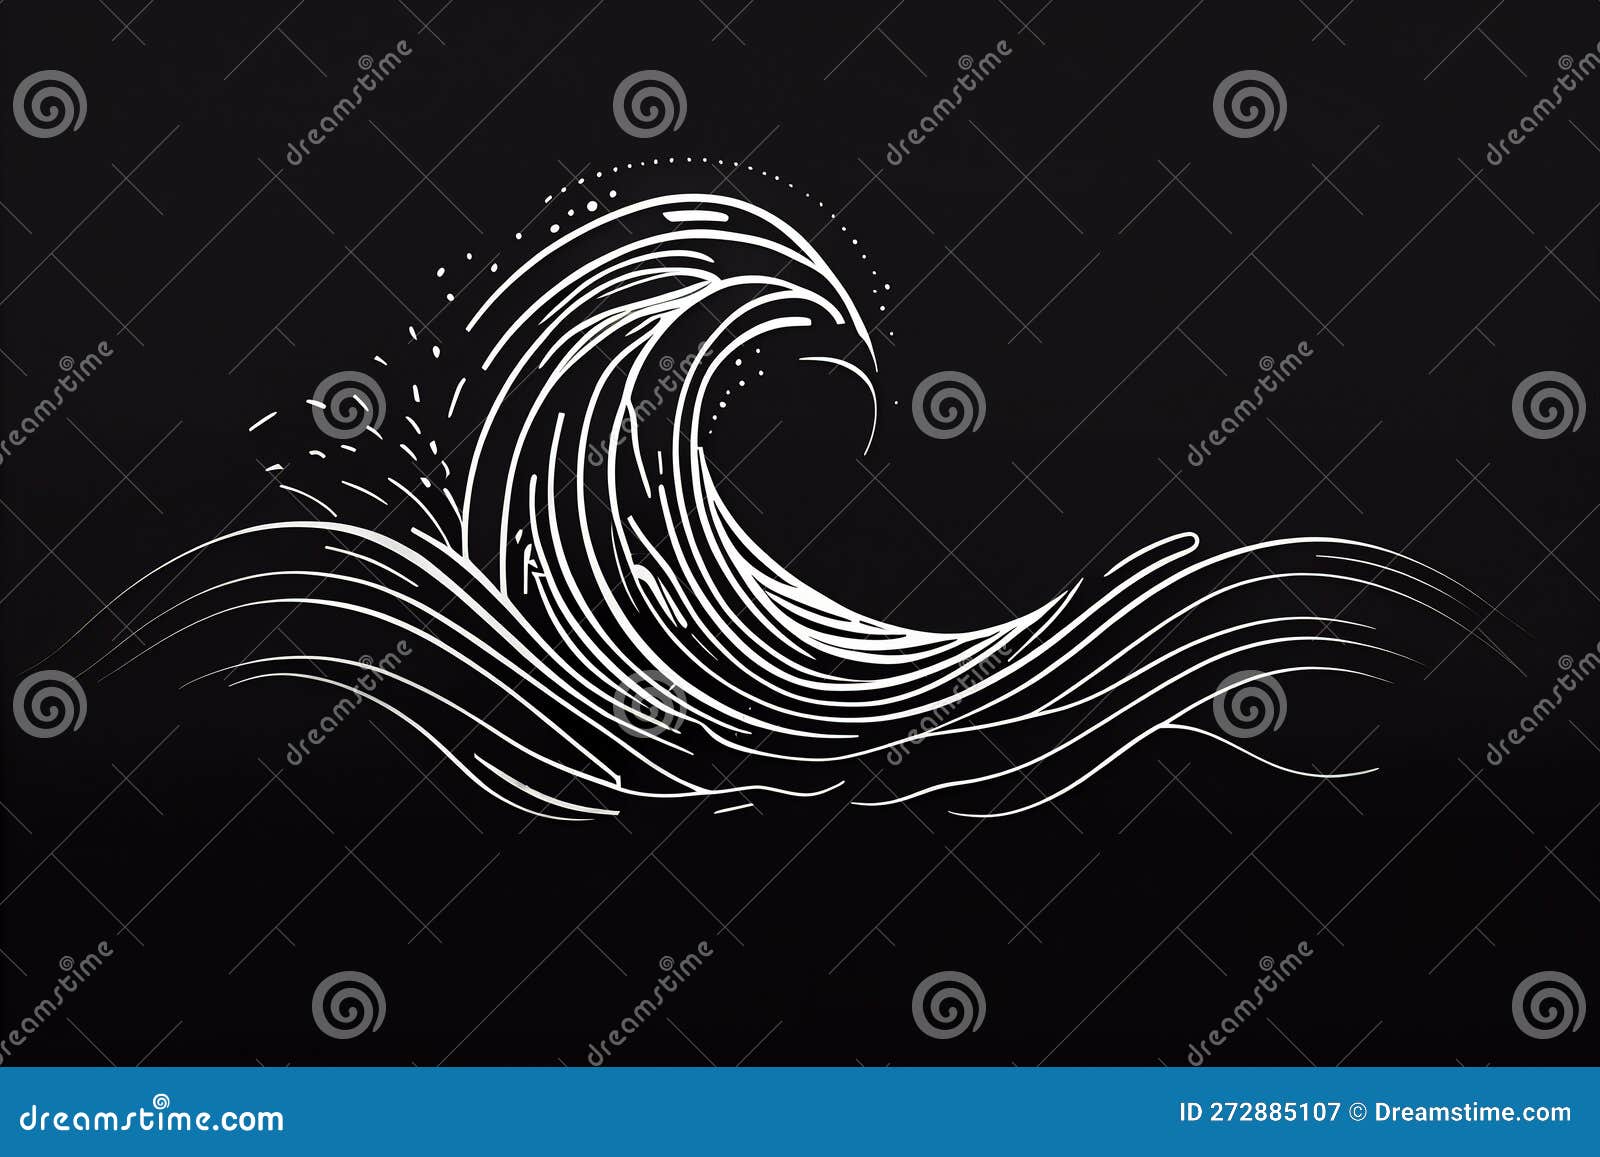 a minimalistic logo of lines featuring the silhouette of an ocean or sea waves, simple s and lines. emblema for any